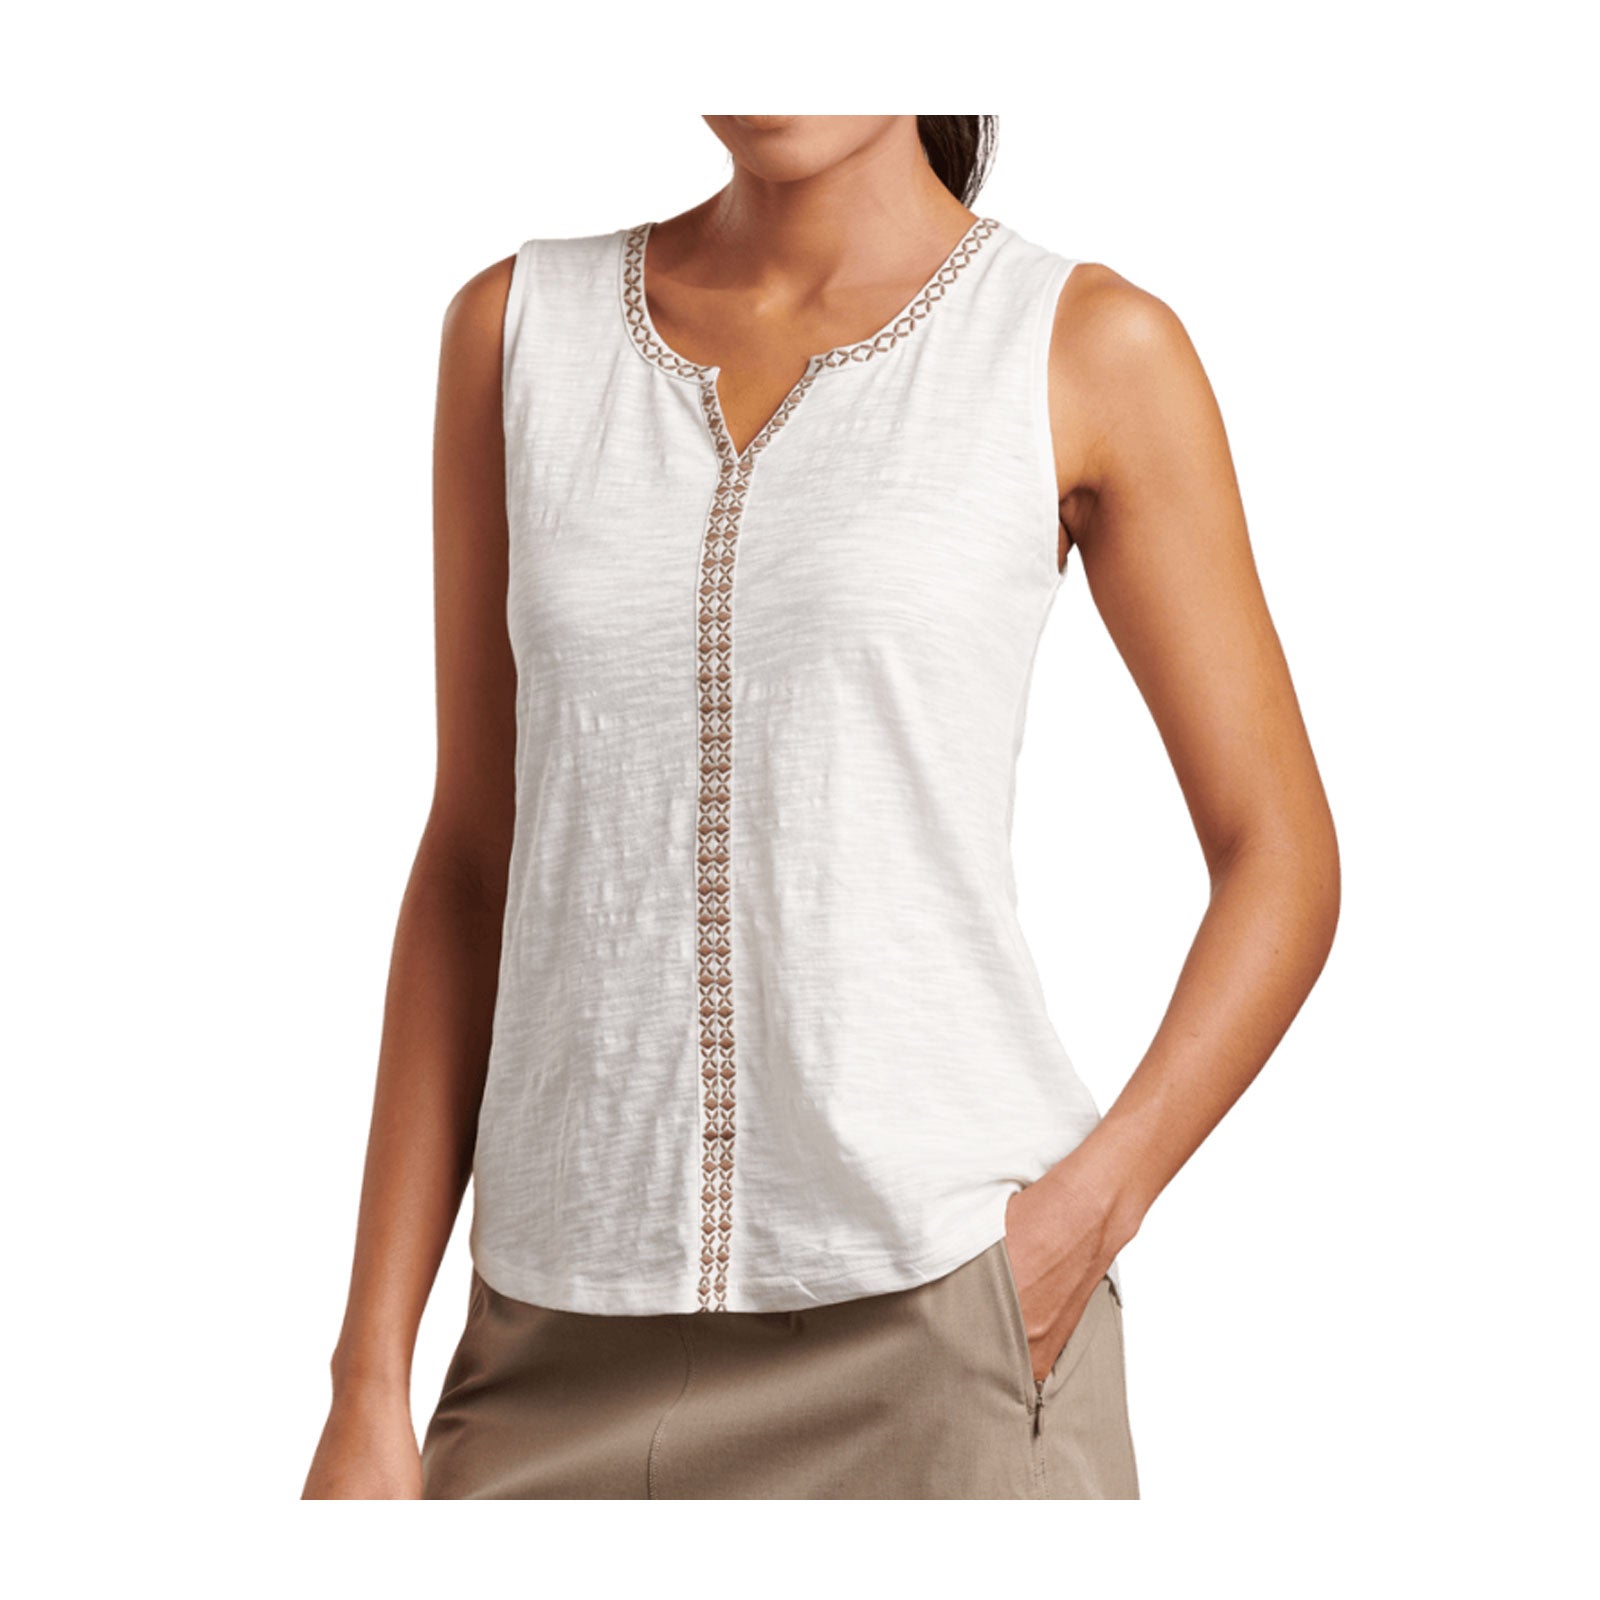 Kuhl Shay Tank Top (Women) - White Outerwear - Upperbody - The Heel Shoe Fitters